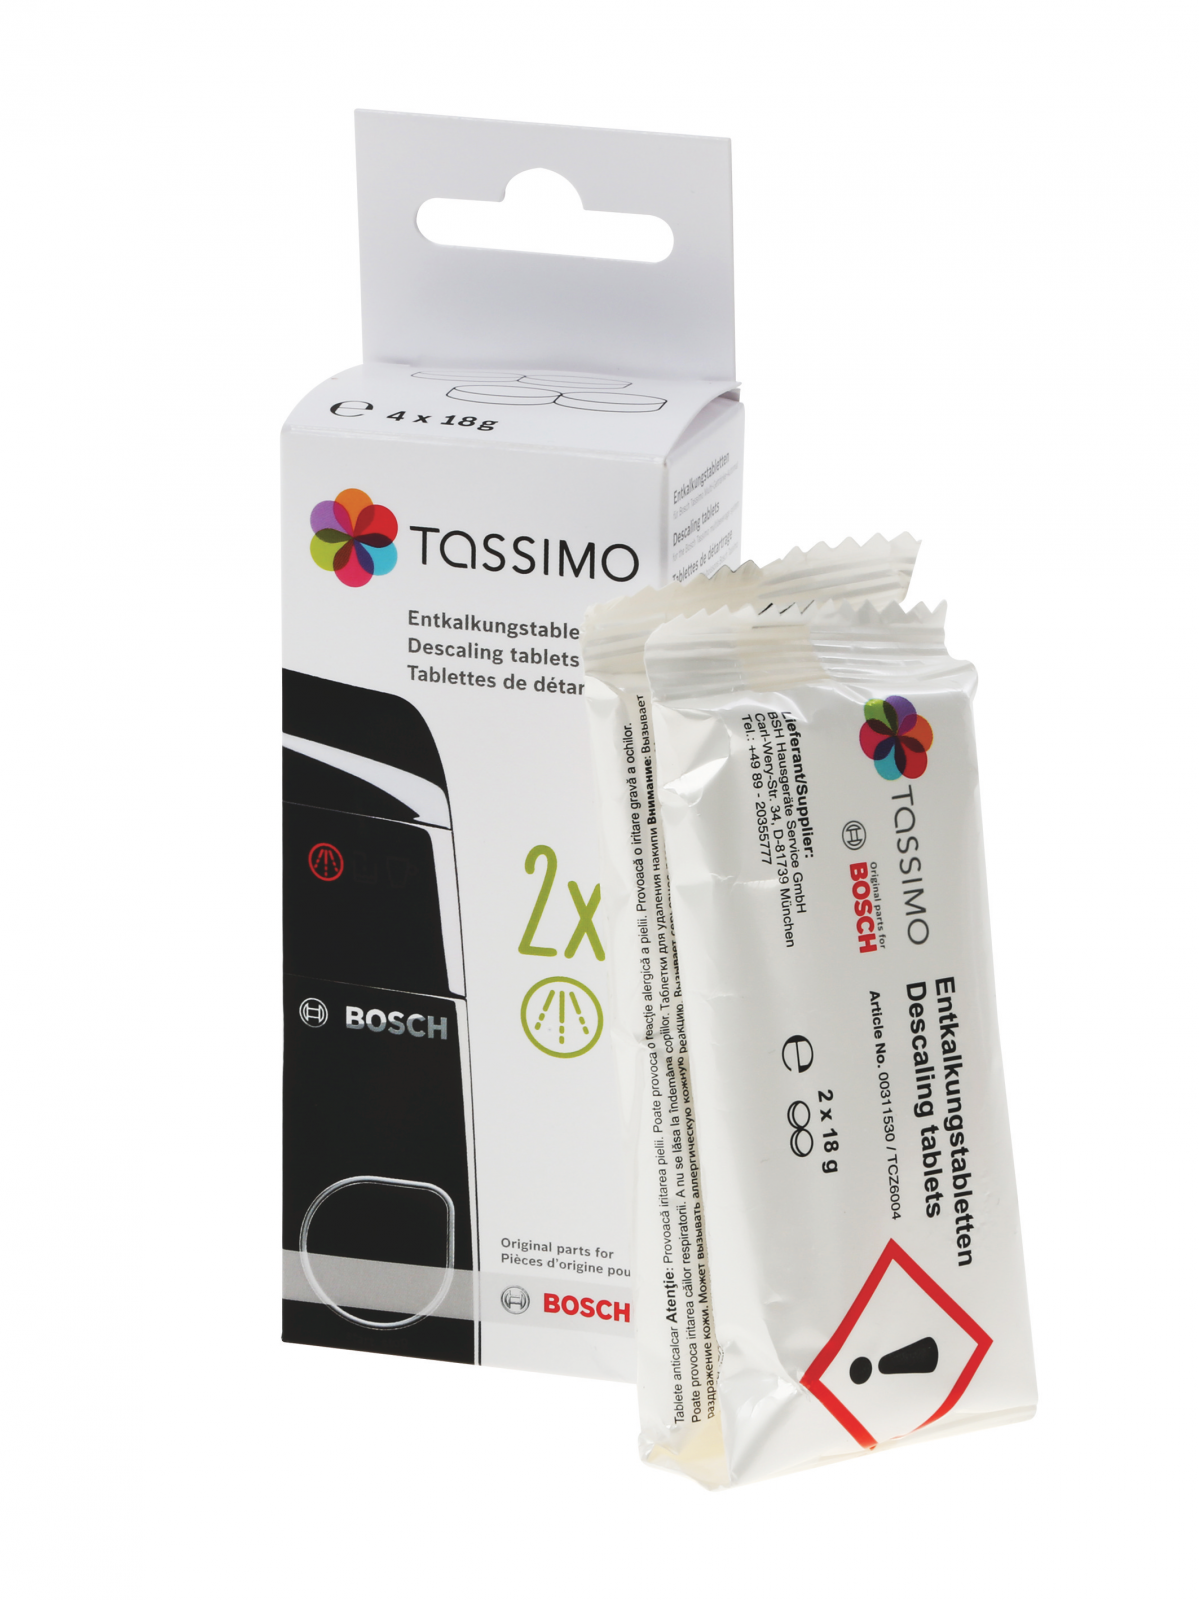 Limescale Remover for Tassimo Coffee Makers - 00311530 BSH - Bosch / Siemens